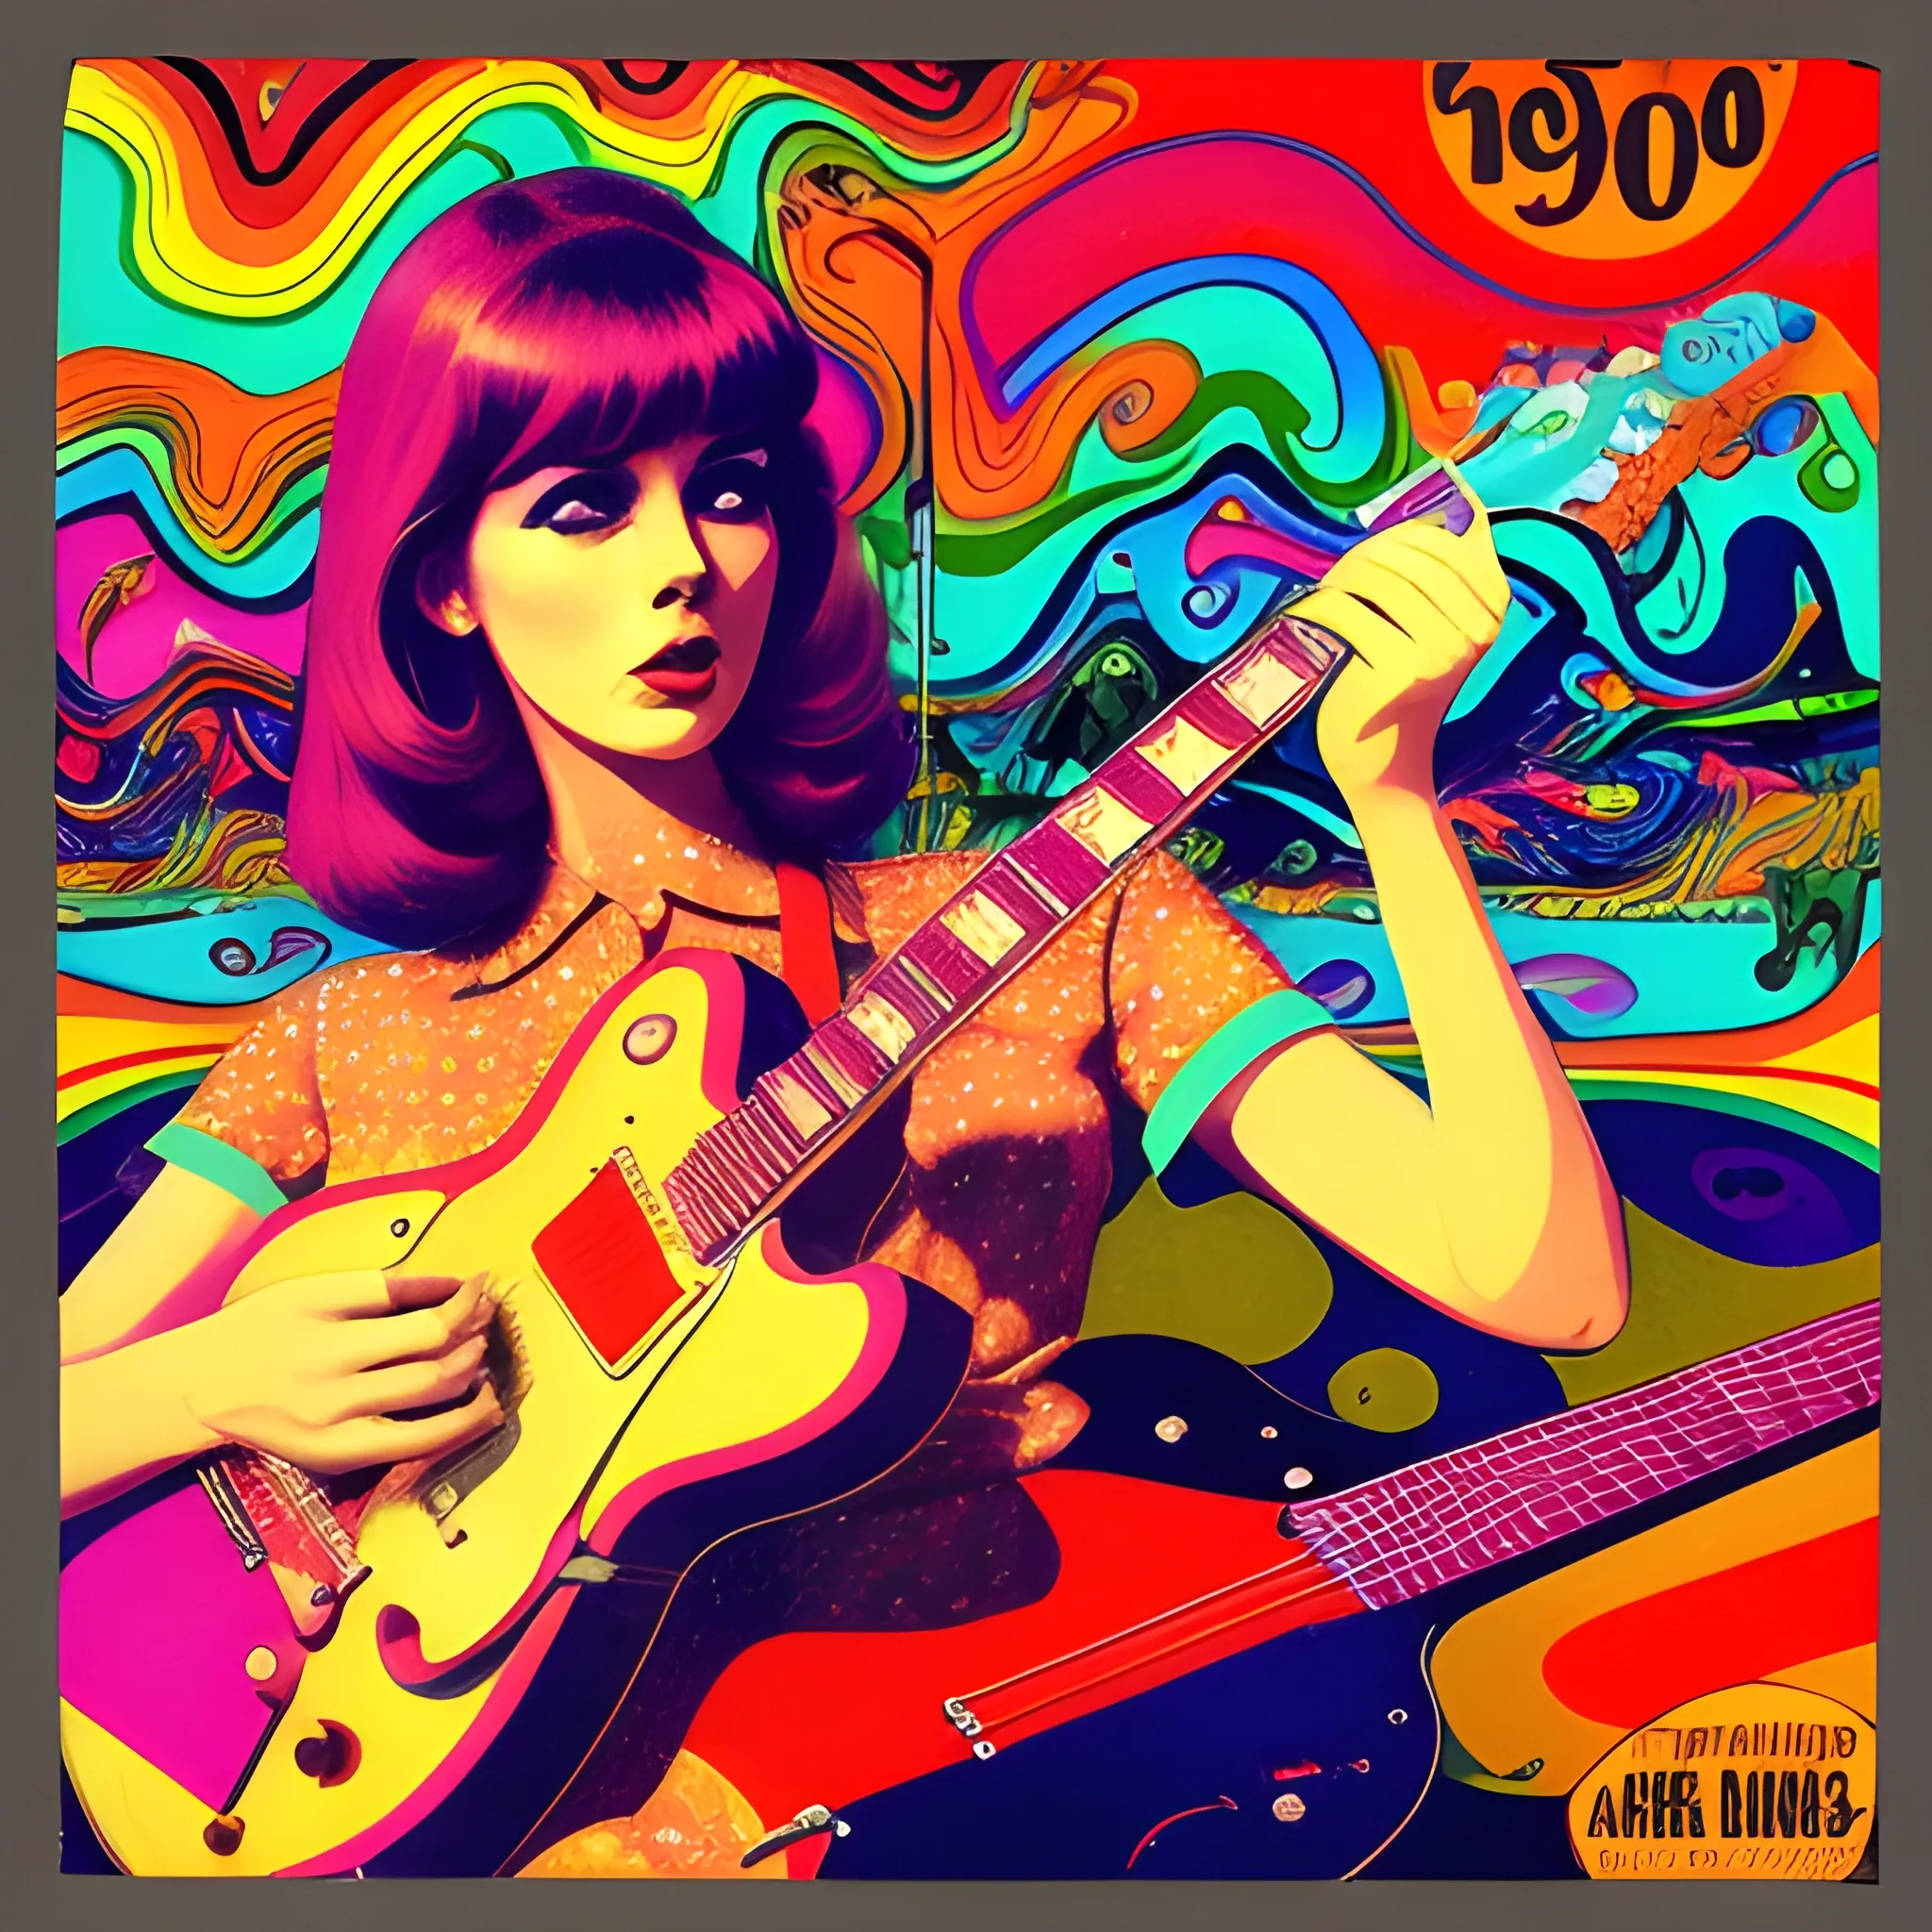 1960's, music album cover, female, psychedelic, guitar